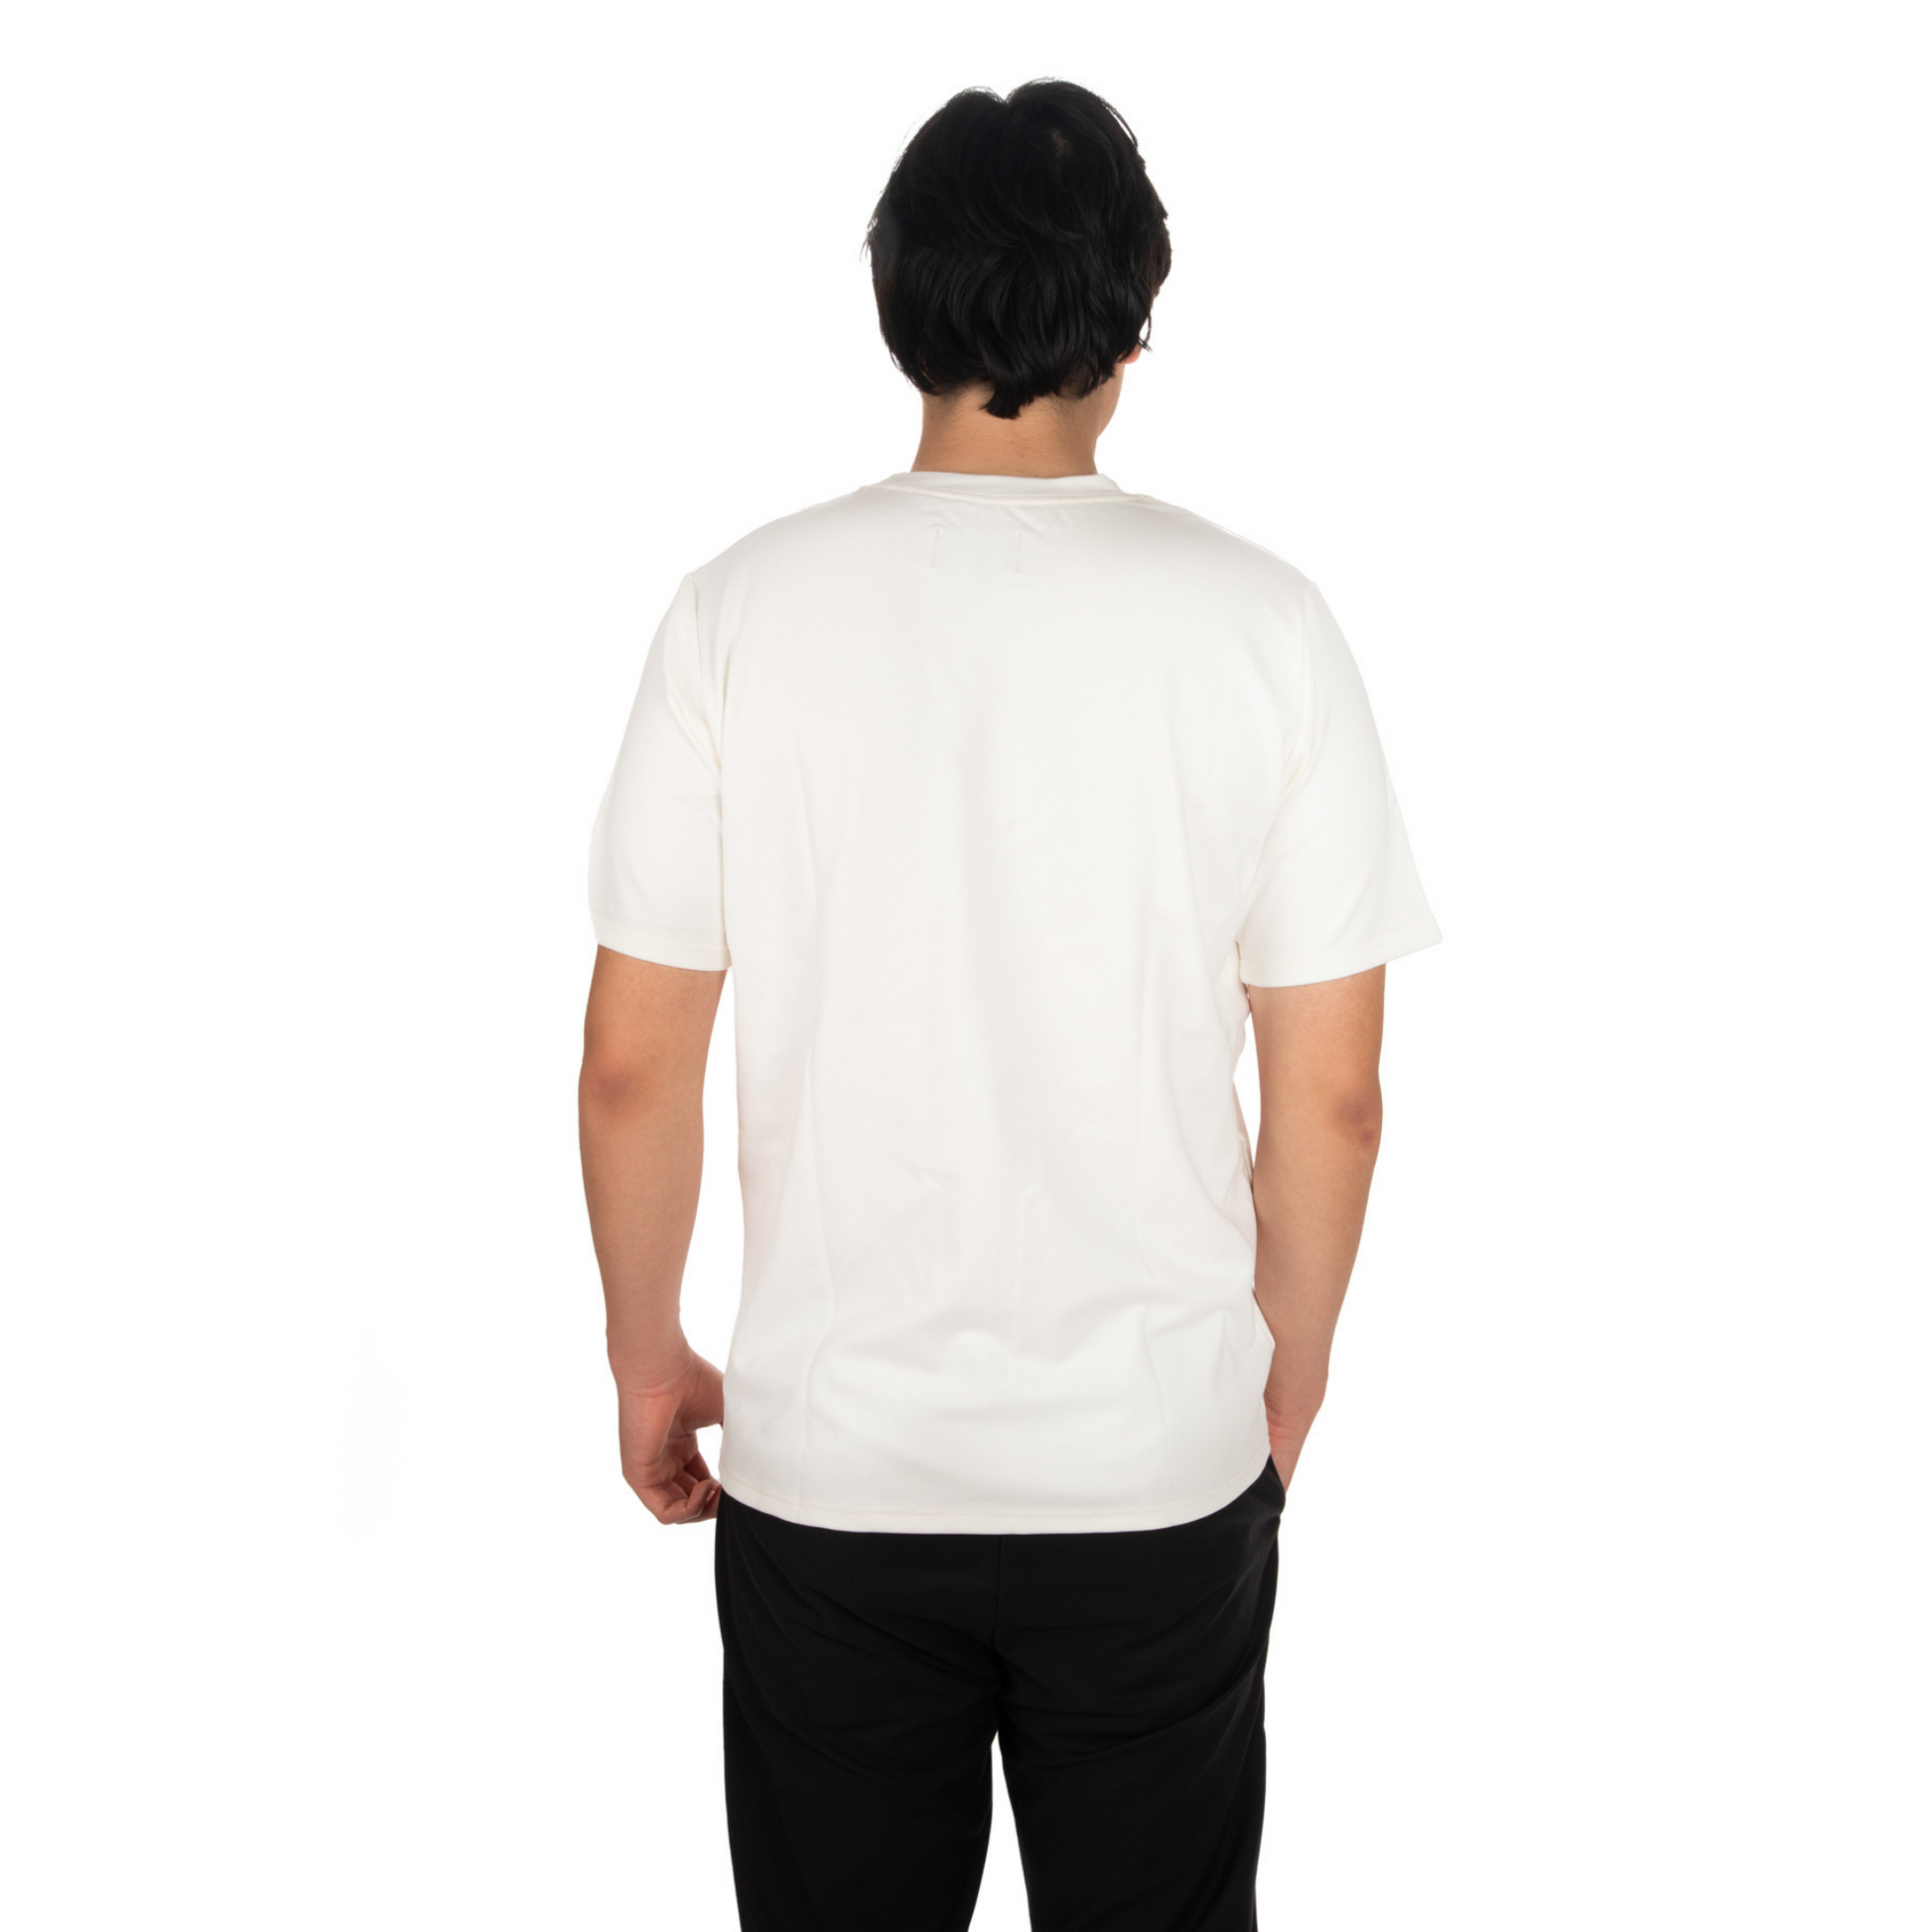 L’Homme Moderne White T-shirt with Stainless Smiley back view on male model